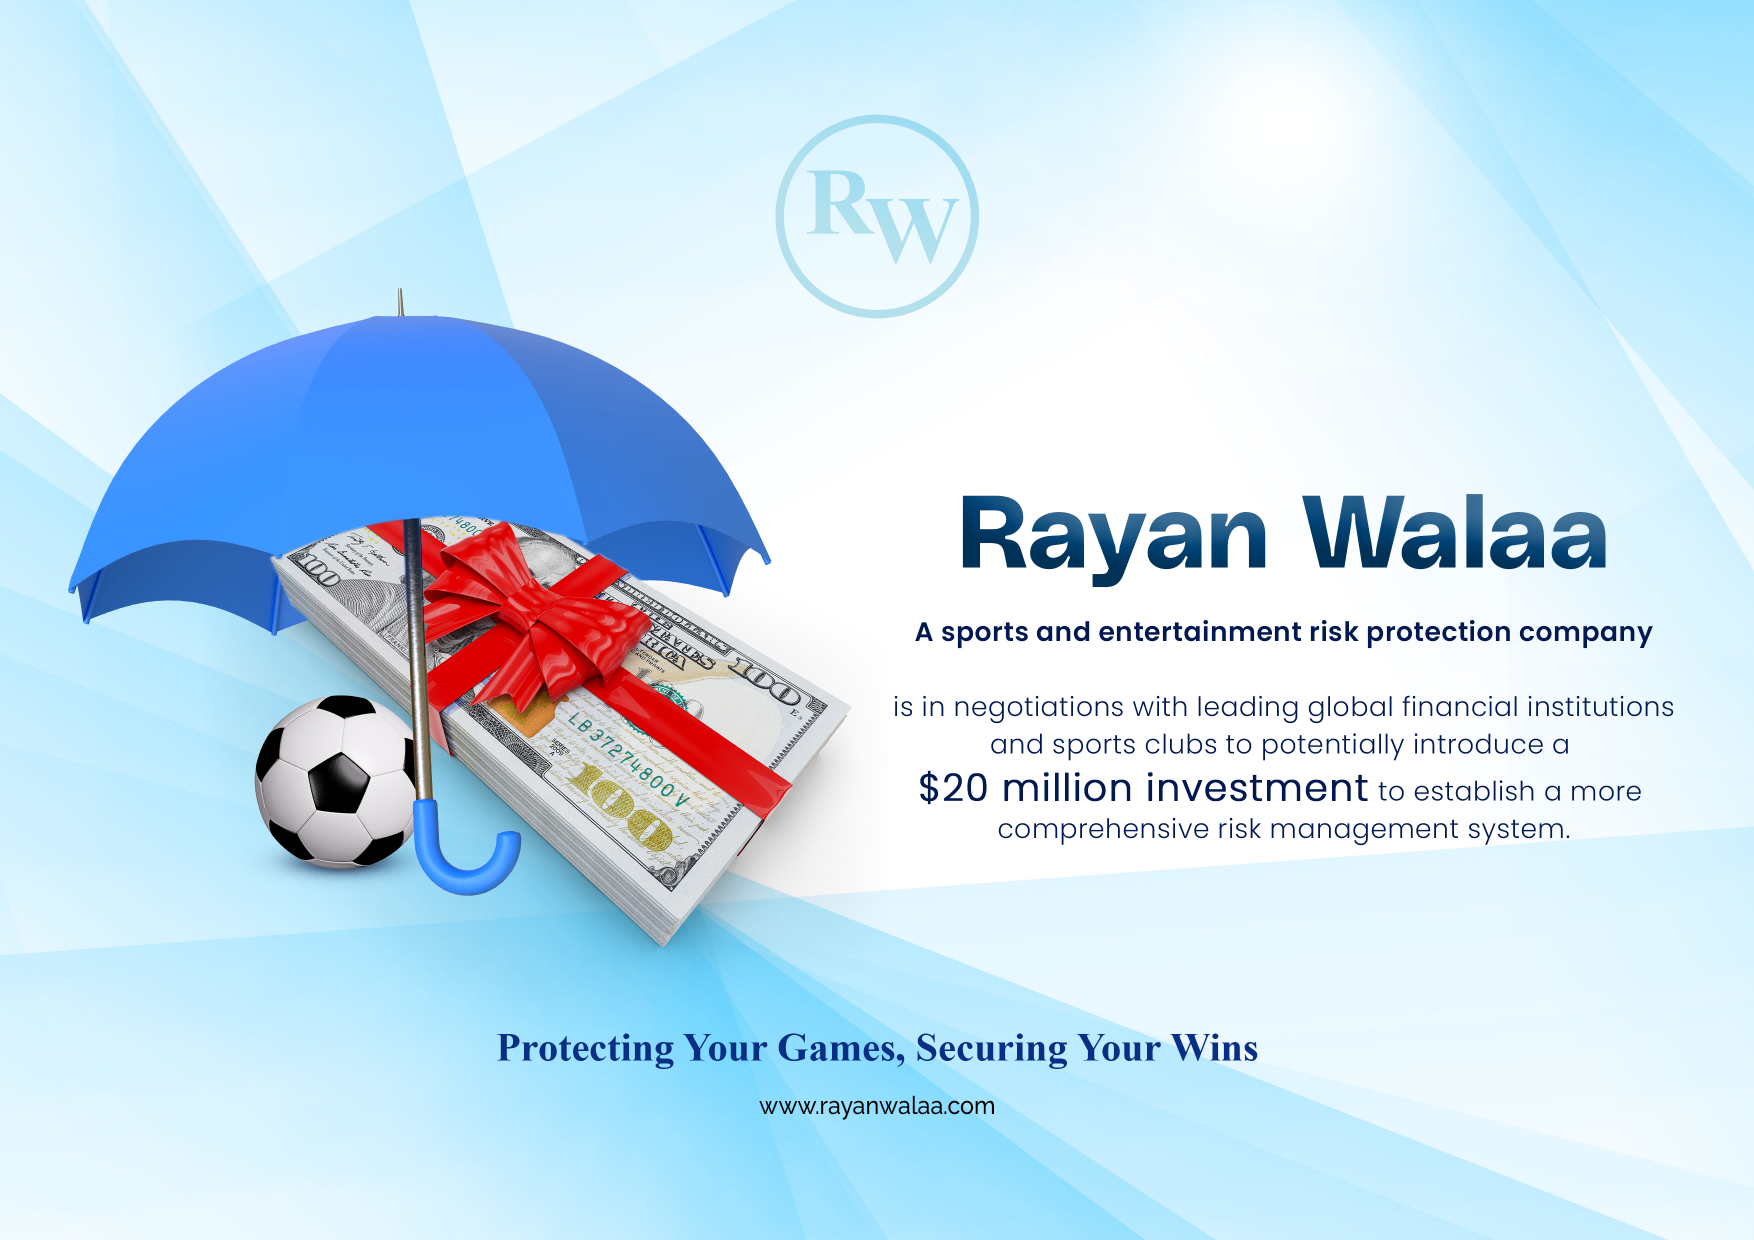 , Rayan Walaa, a pioneering sports entertainment risk protection company, is in discussions with top global financial institutions and sports clubs to potentially secure a $20 million investment